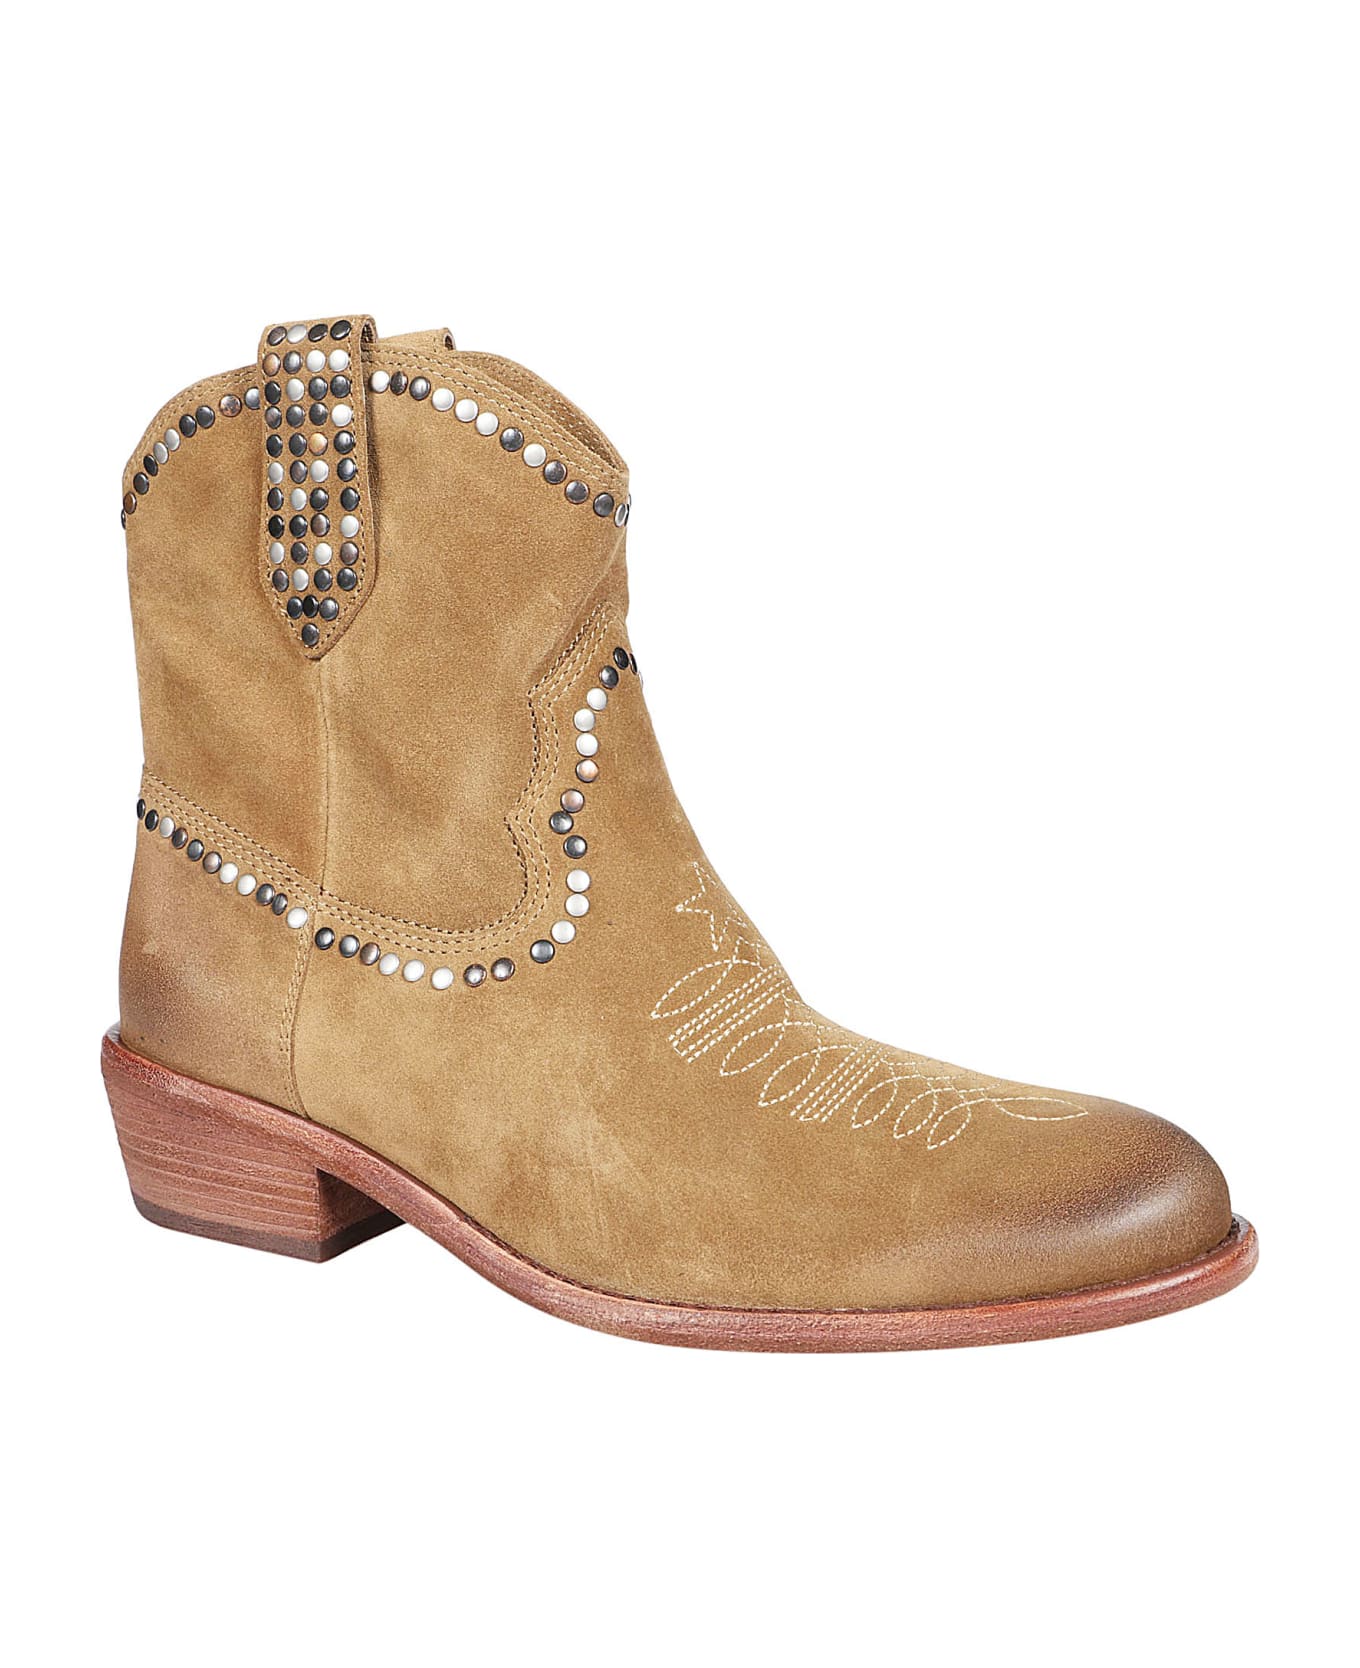 Ash Gipsy Texan Ankle Boots - Antilope ブーツ